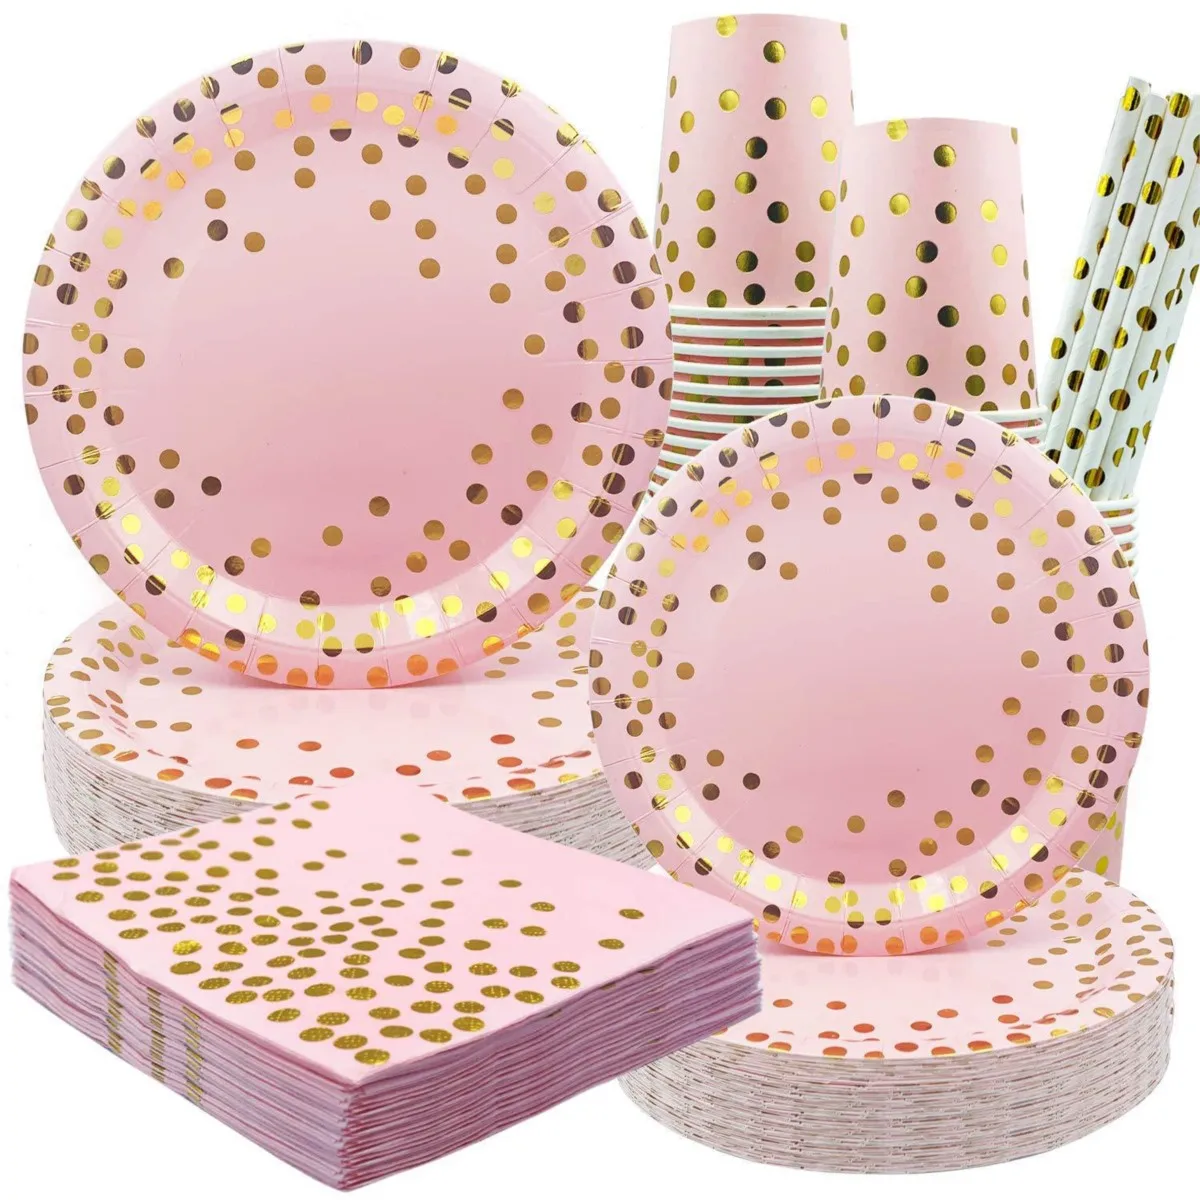 

Nordic Party Tableware Pink Gold Foil Dots Party Supplies Parties Dinnerware Set, Wedding Paper Cups Plates Napkins Cutlery